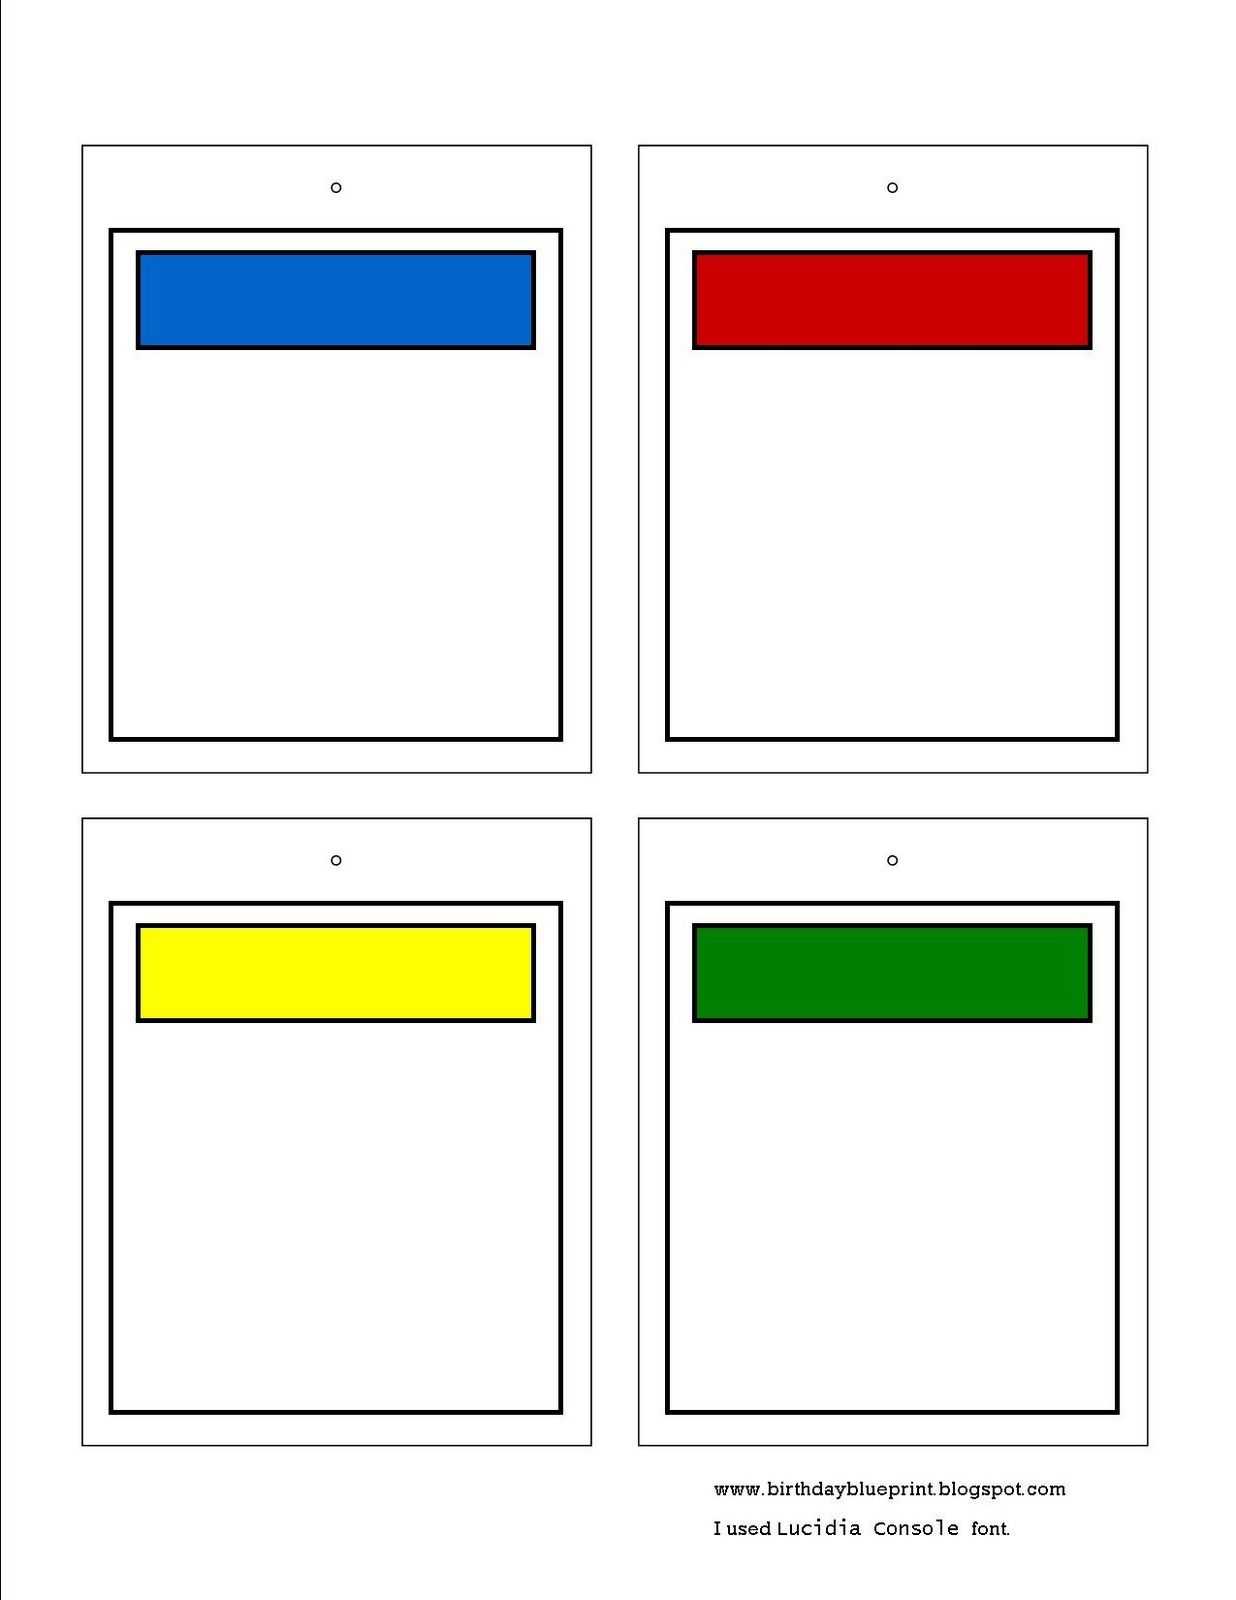 Blank Monopoly Property Cards. To Write In The Bible Memory With Regard To Monopoly Property Cards Template